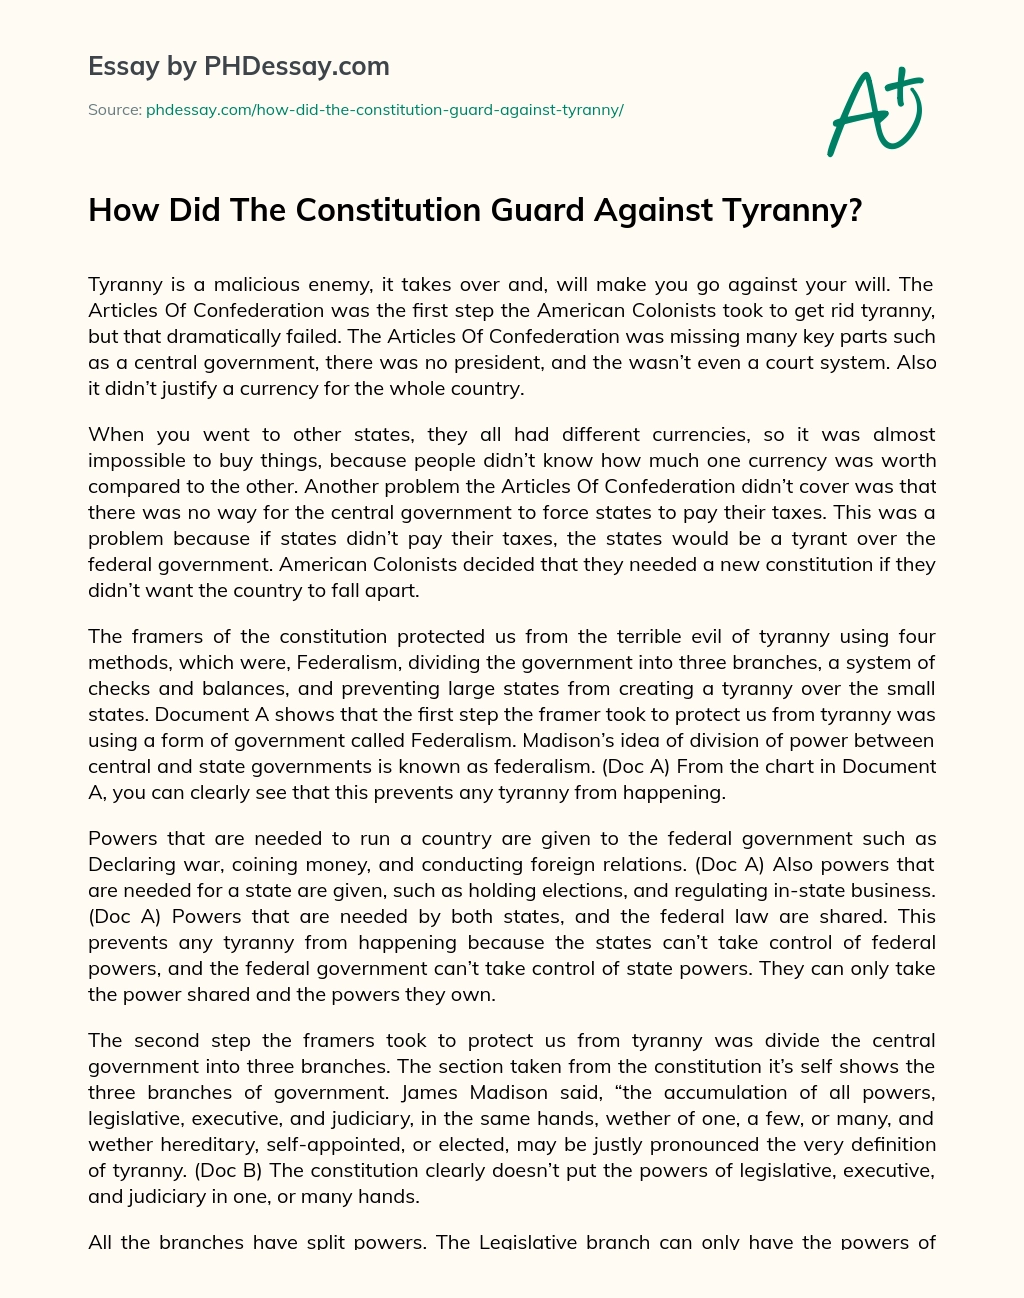 How Did The Constitution Guard Against Tyranny? essay